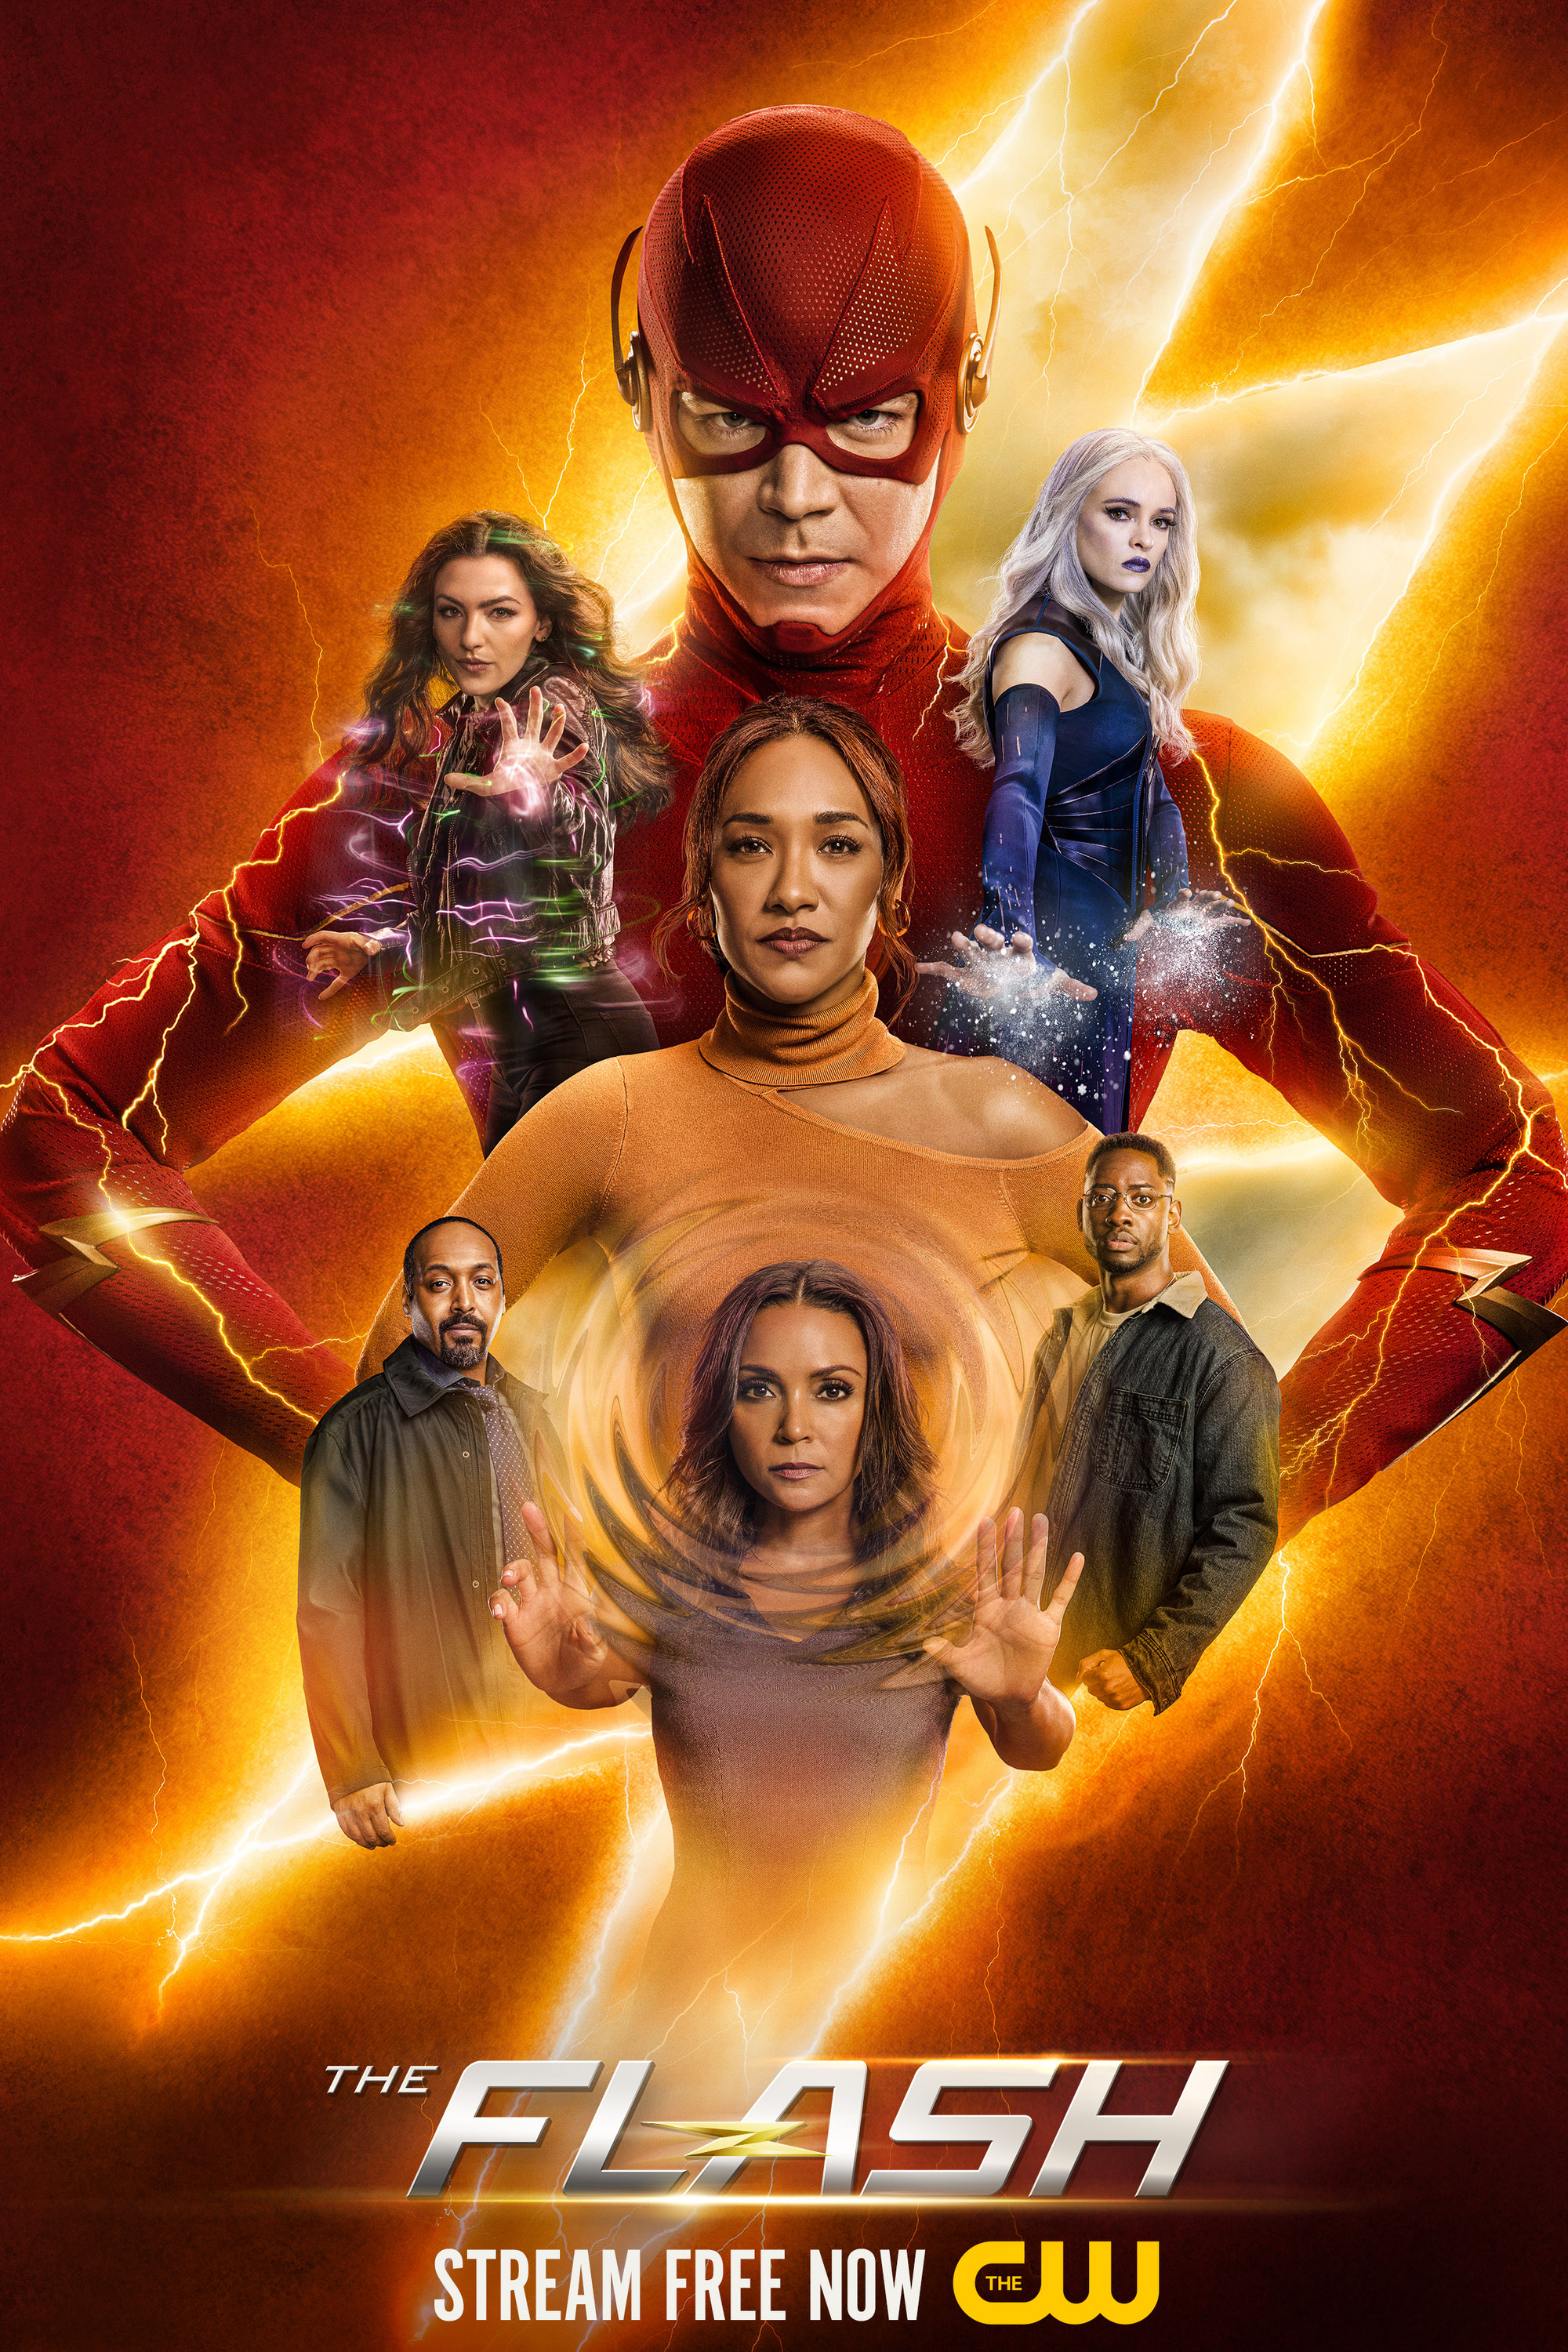 Mega Sized Movie Poster Image for The Flash (#52 of 54)